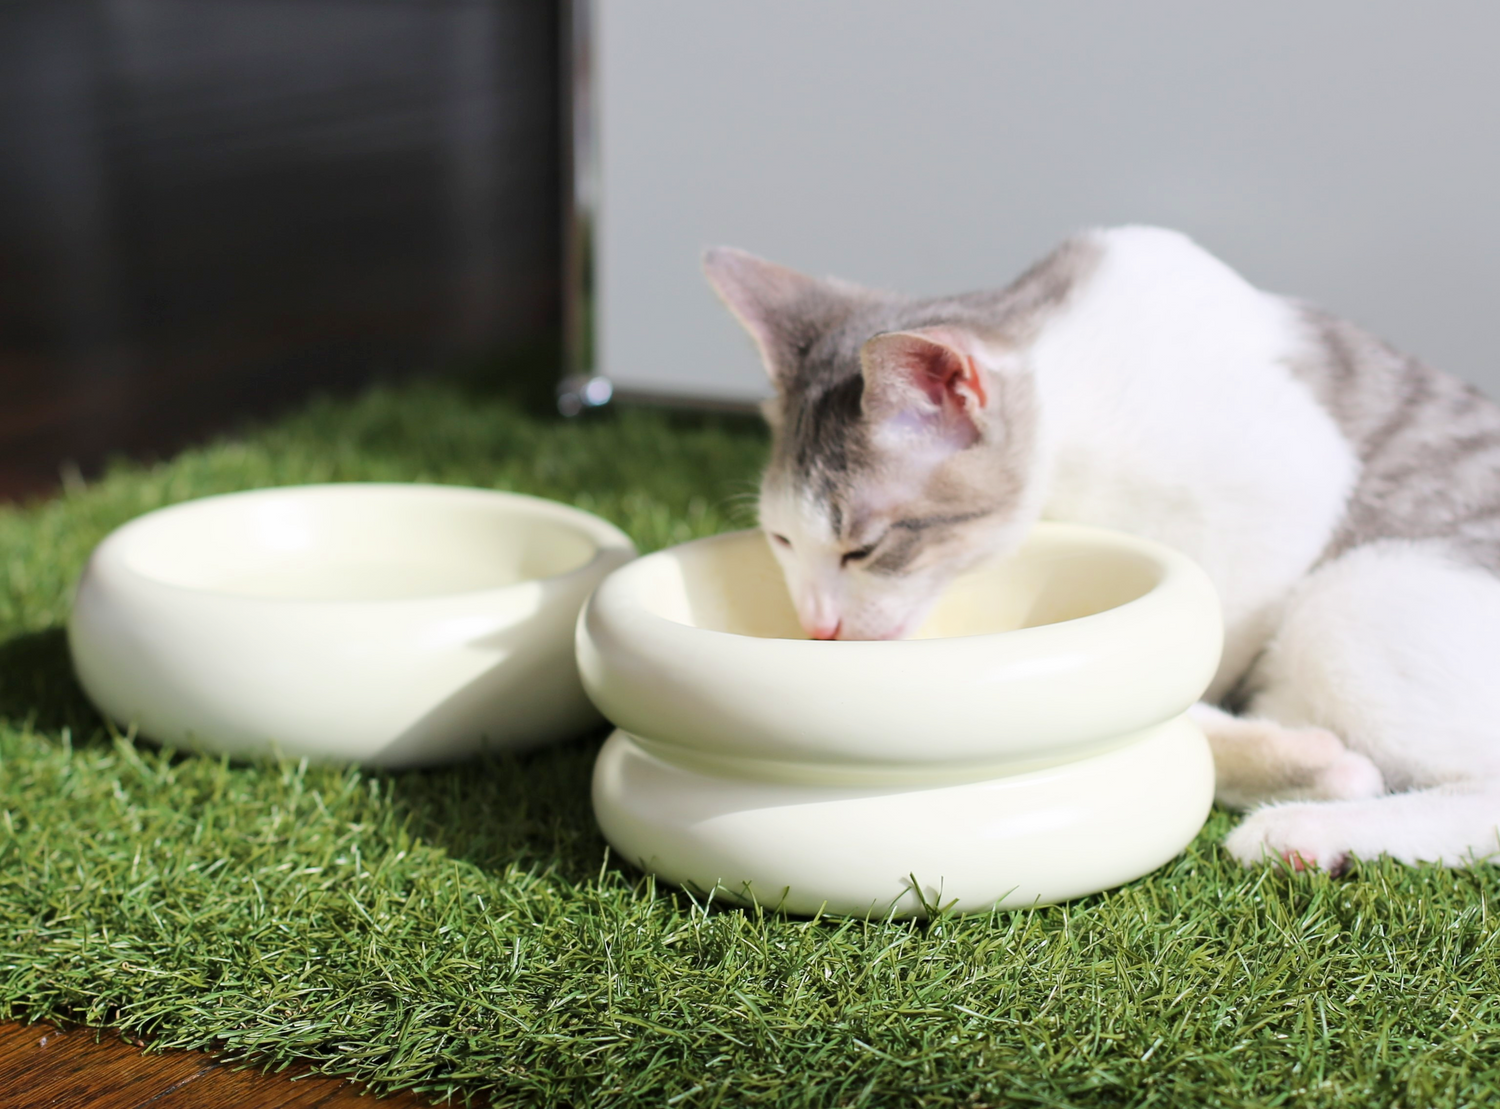 grey and white cat eating from elevated cat bowl in white ceramic on astroturf